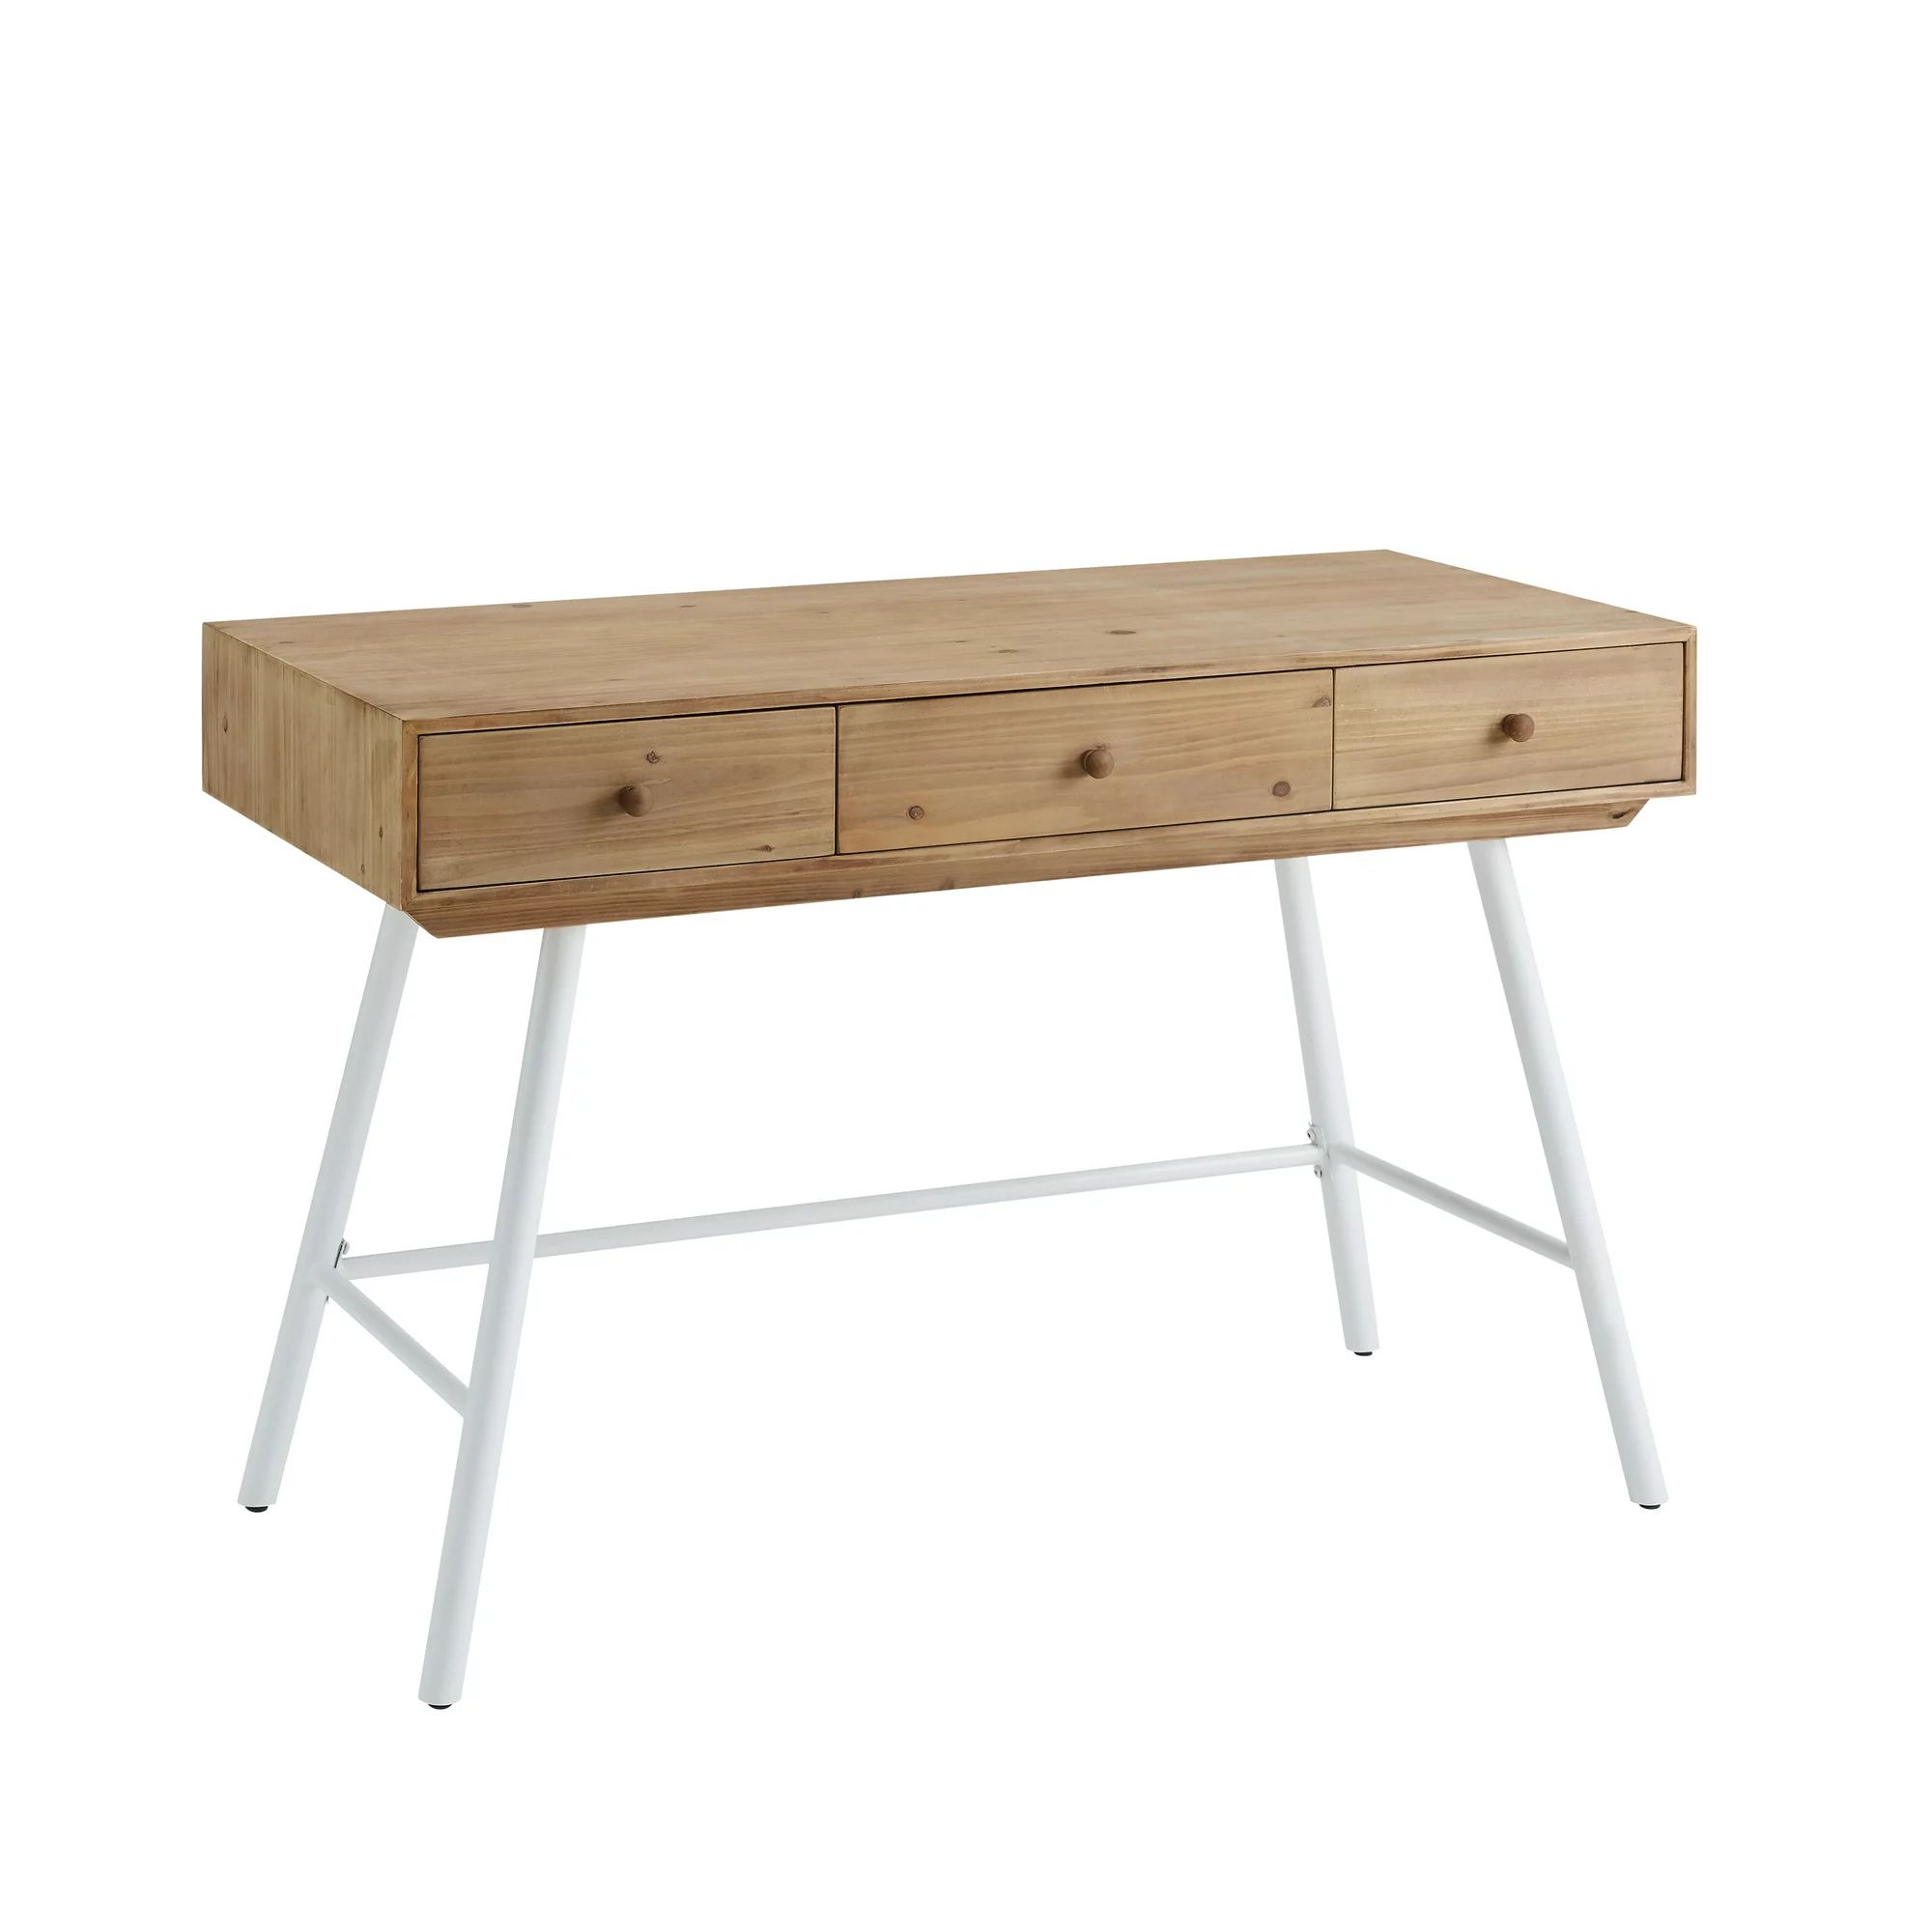 Linon Kessinger 44" Writing Desk with 3 Drawers, Natural and White | Walmart (US)